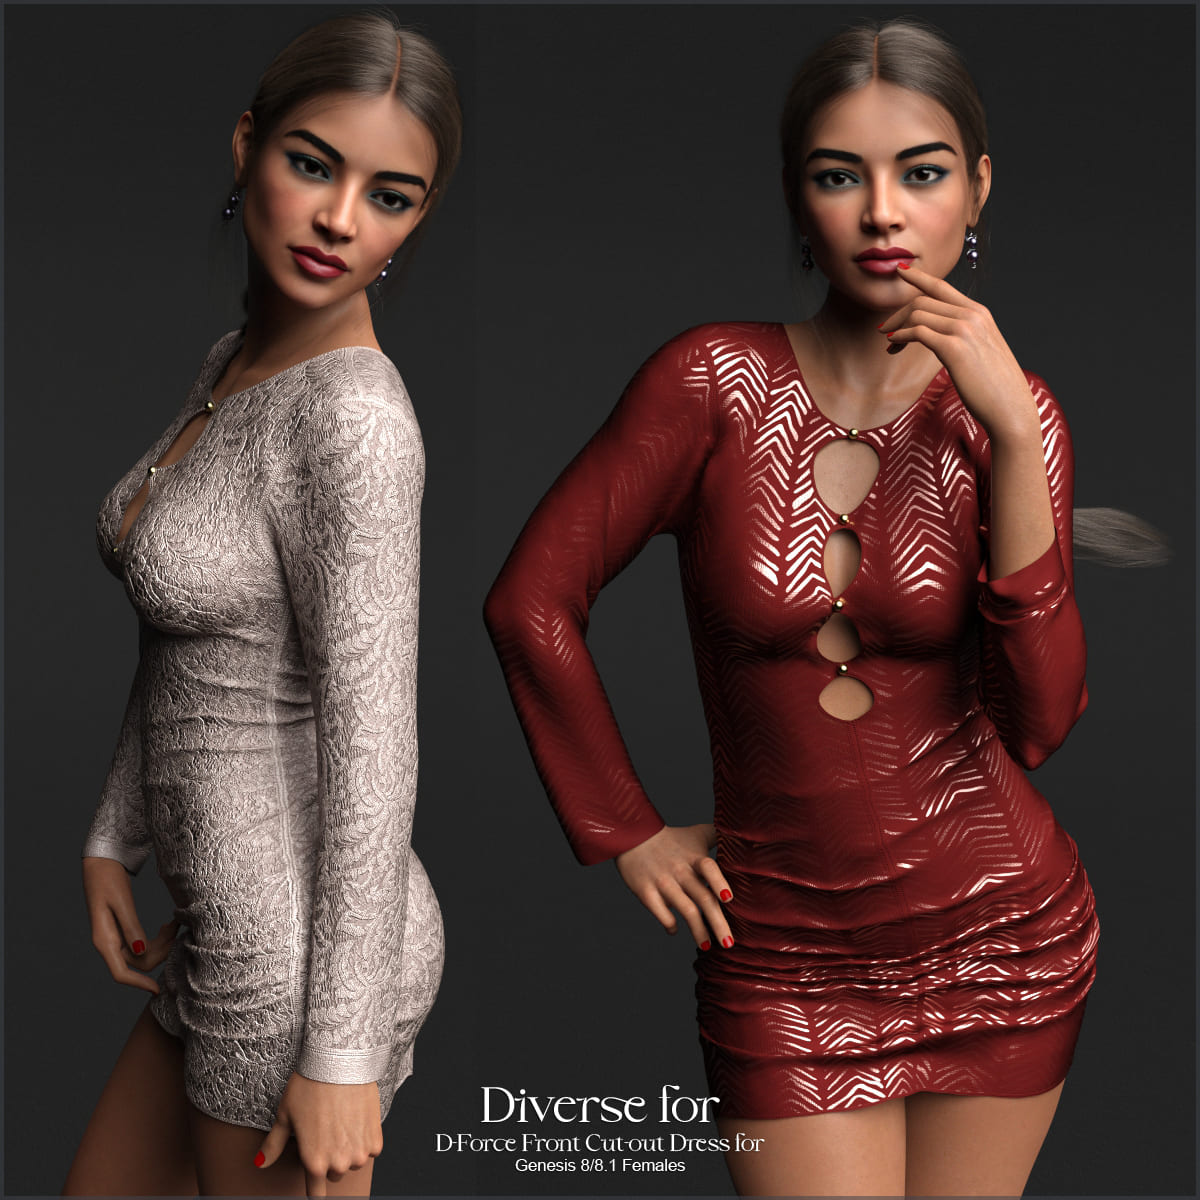 Diverse for D-Force Front Cut-out Dress for G8F and G8.1F_DAZ3DDL